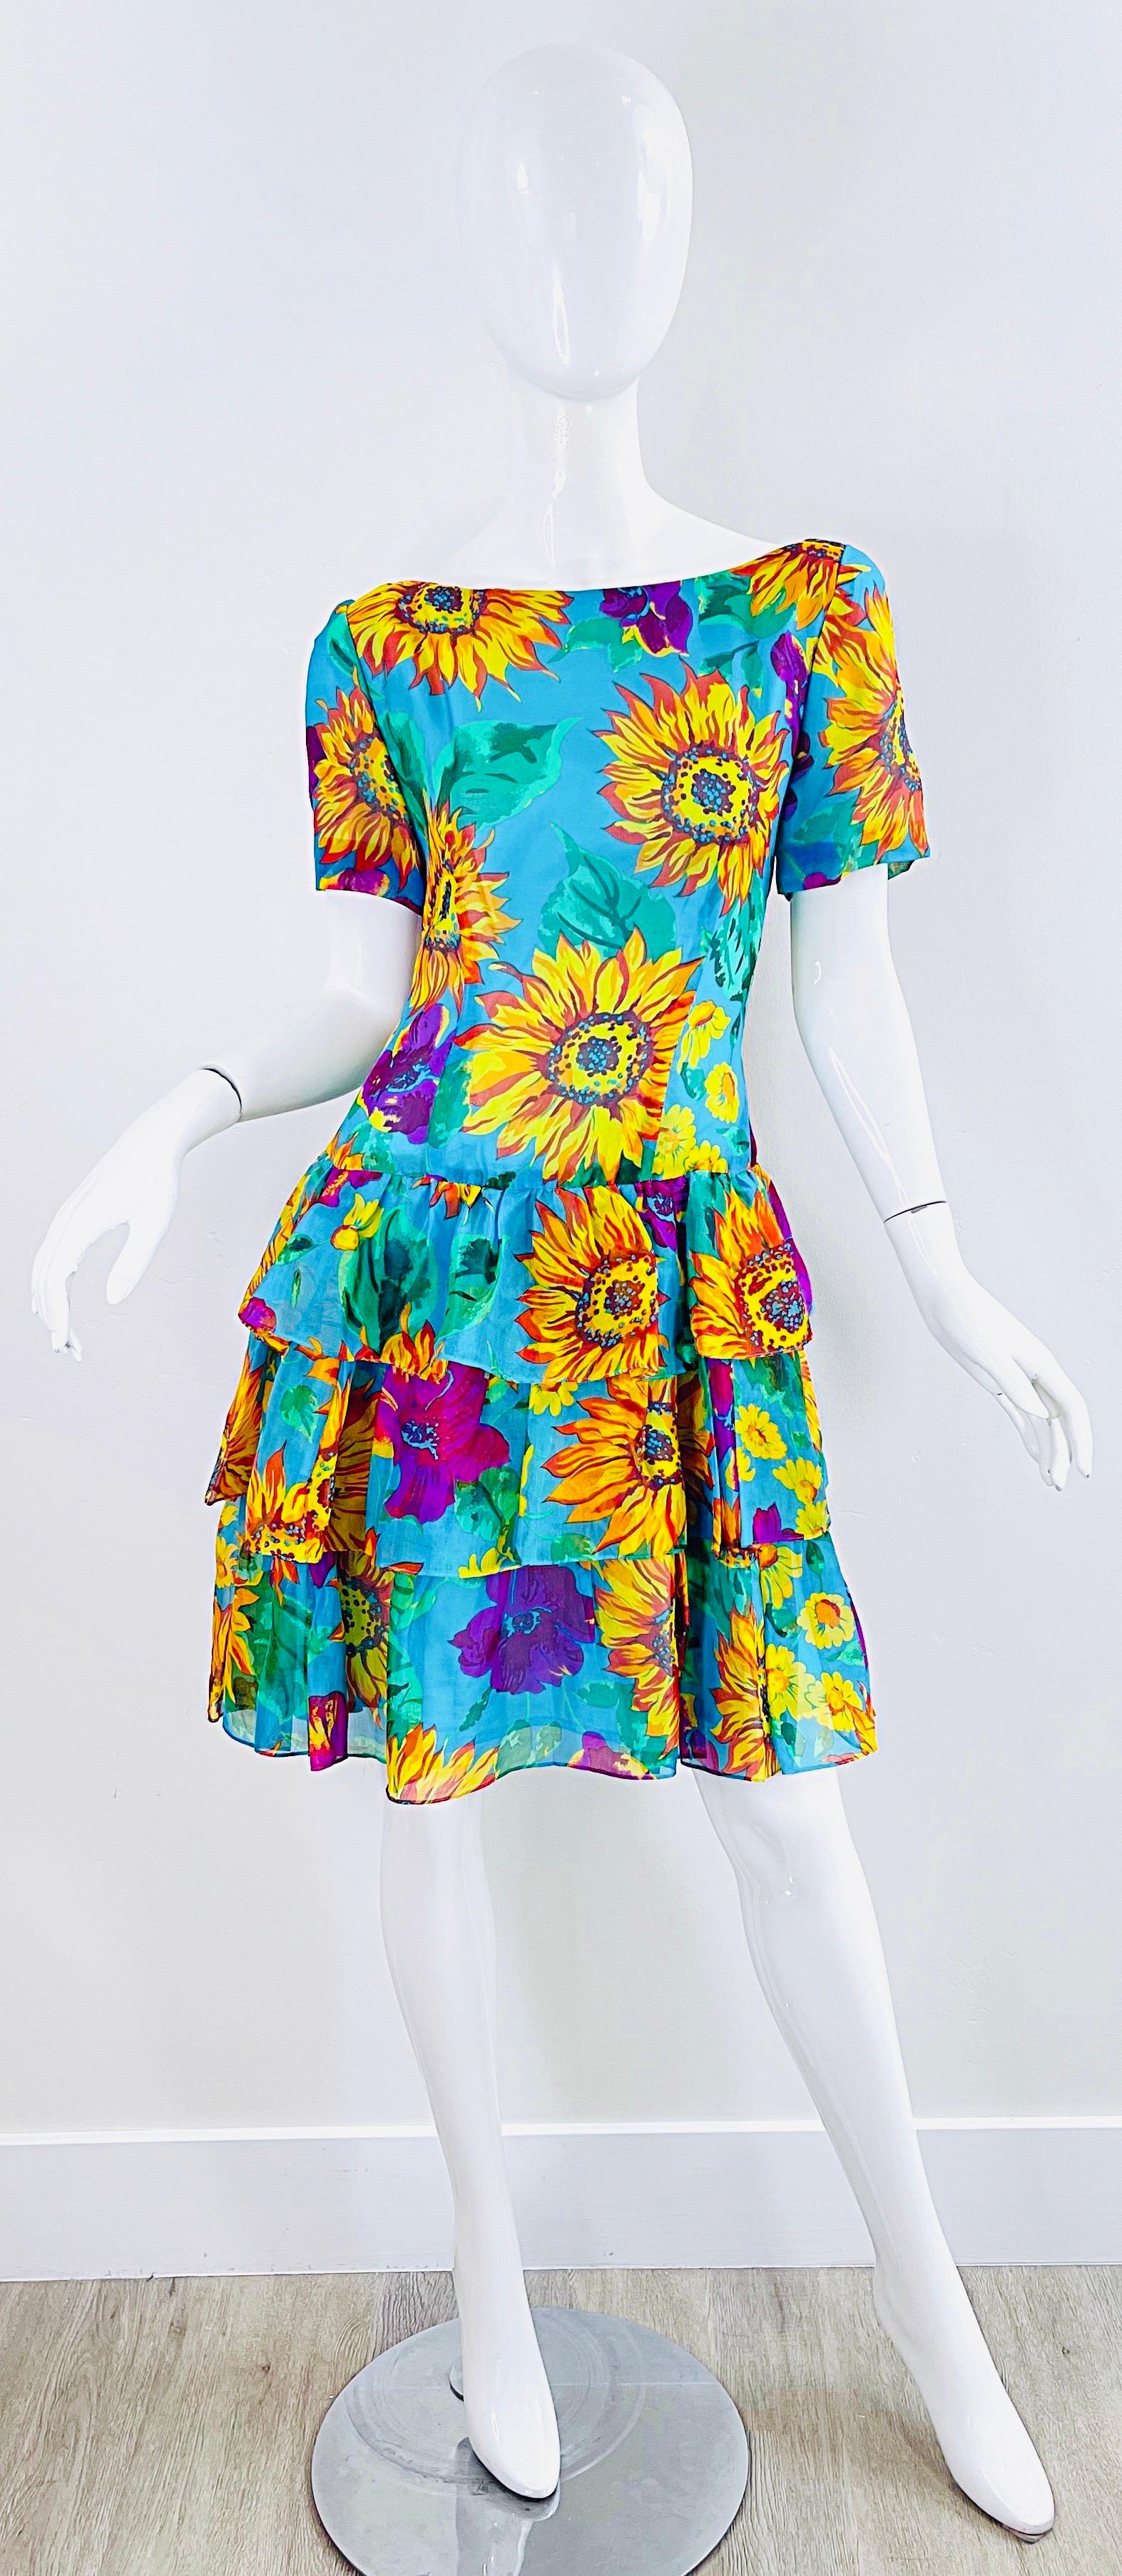 Chic late 80s sunflower and hibiscus printed silk chiffon short sleeve dress ! Features a tailored bodice with a tiered ruffle skirt. Hidden zipper up the back with hook-and-eye closure. 
Great belted or alone for any day or evening event. Pair with